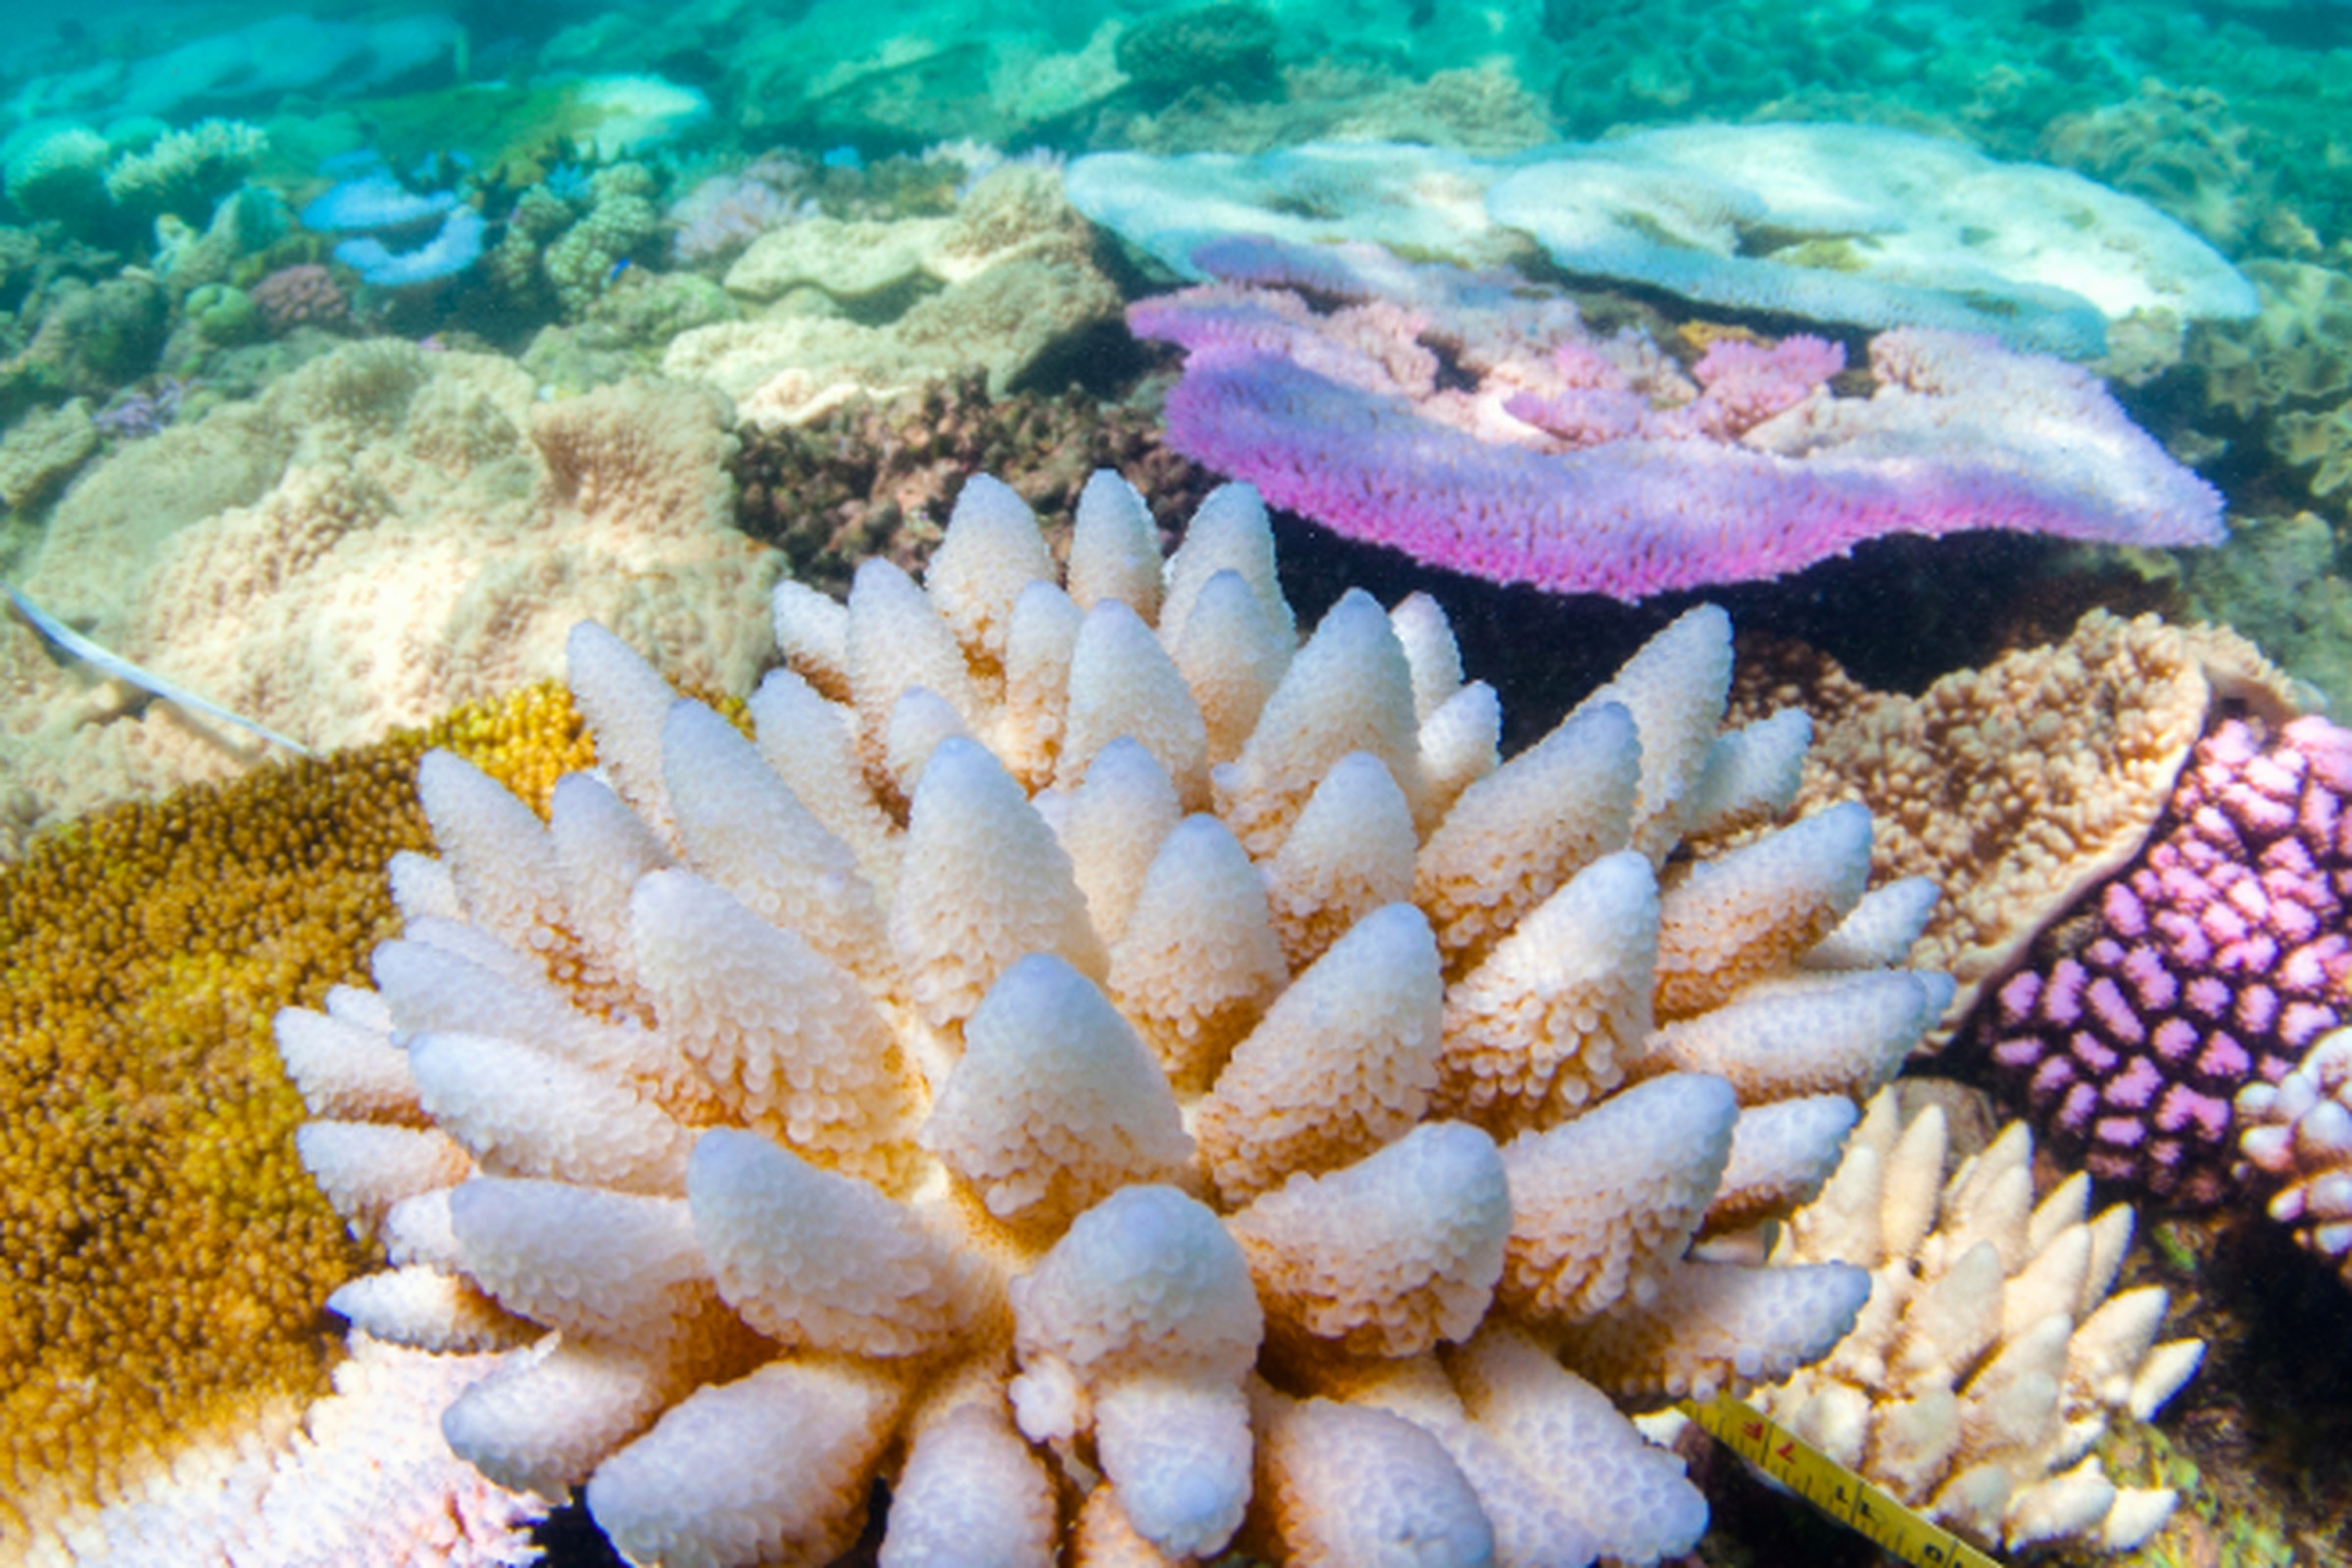 Bleached and fluorescing corals on the northern Great Barrier Reef in April 2017.